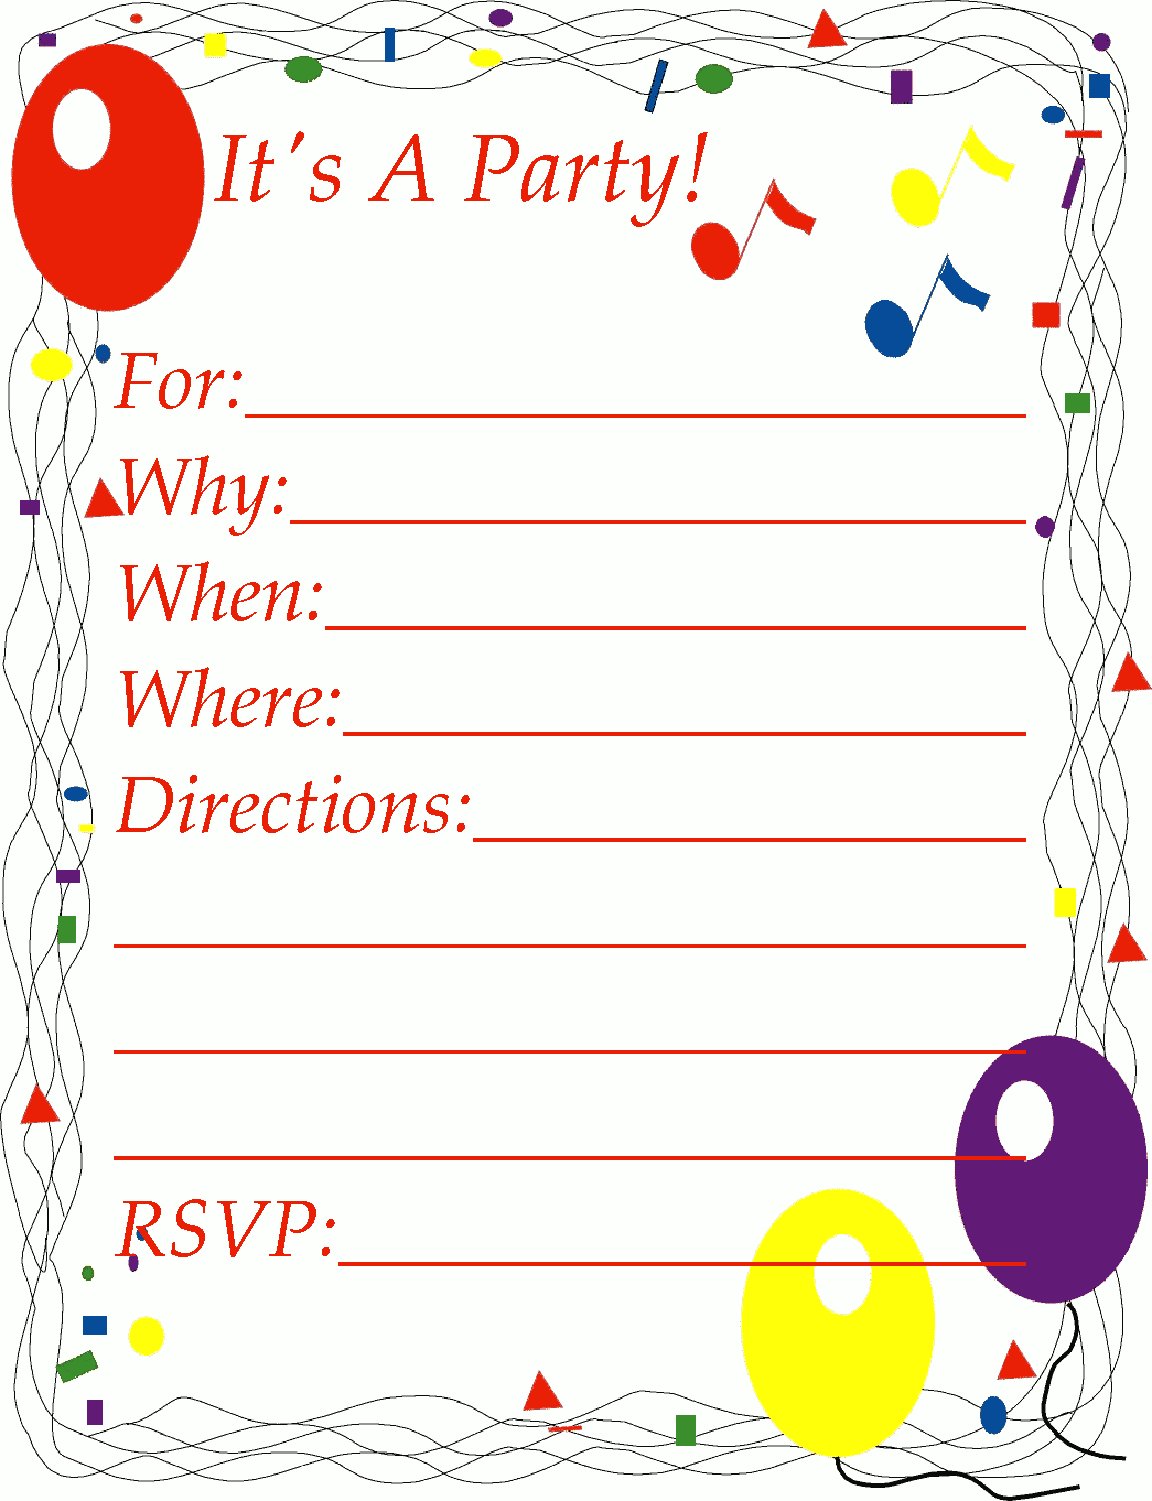 free christmas clipart for invitations - photo #44